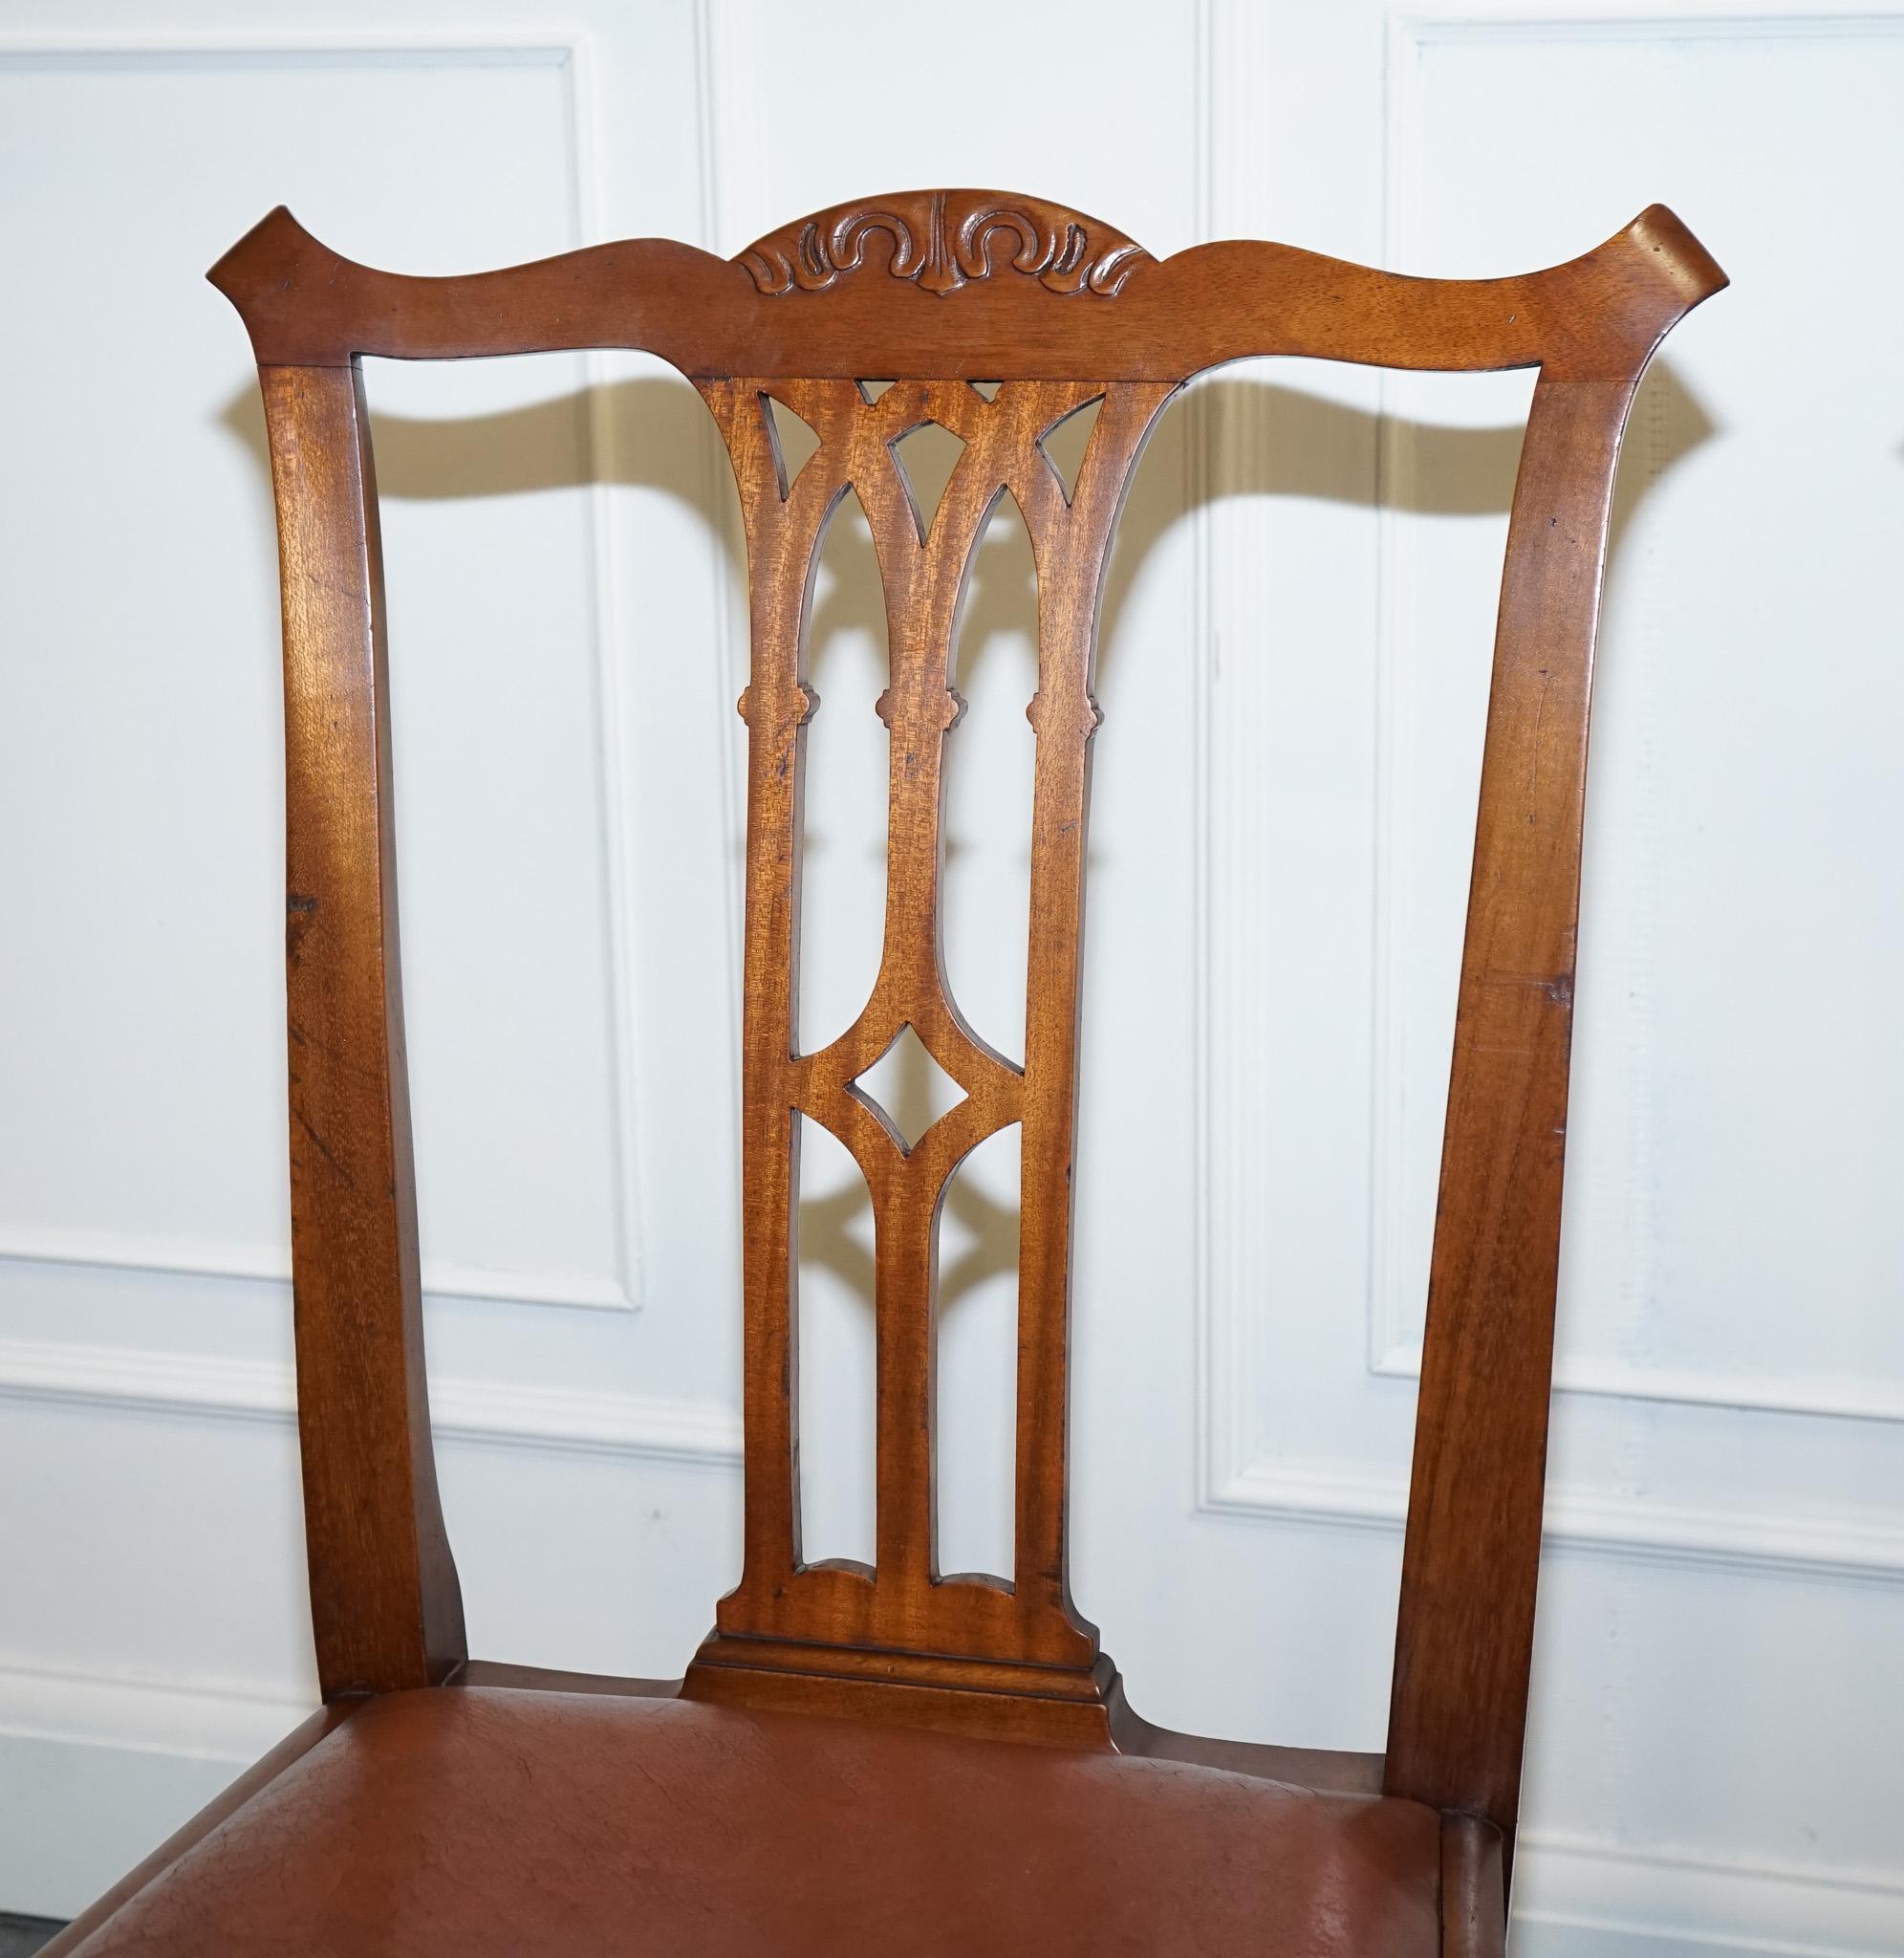 CHIPPENDALE STYLE 5 DINING CHAIRS WiTH LEATHER SEATS PERFECT FOR ROUND TABLE For Sale 1